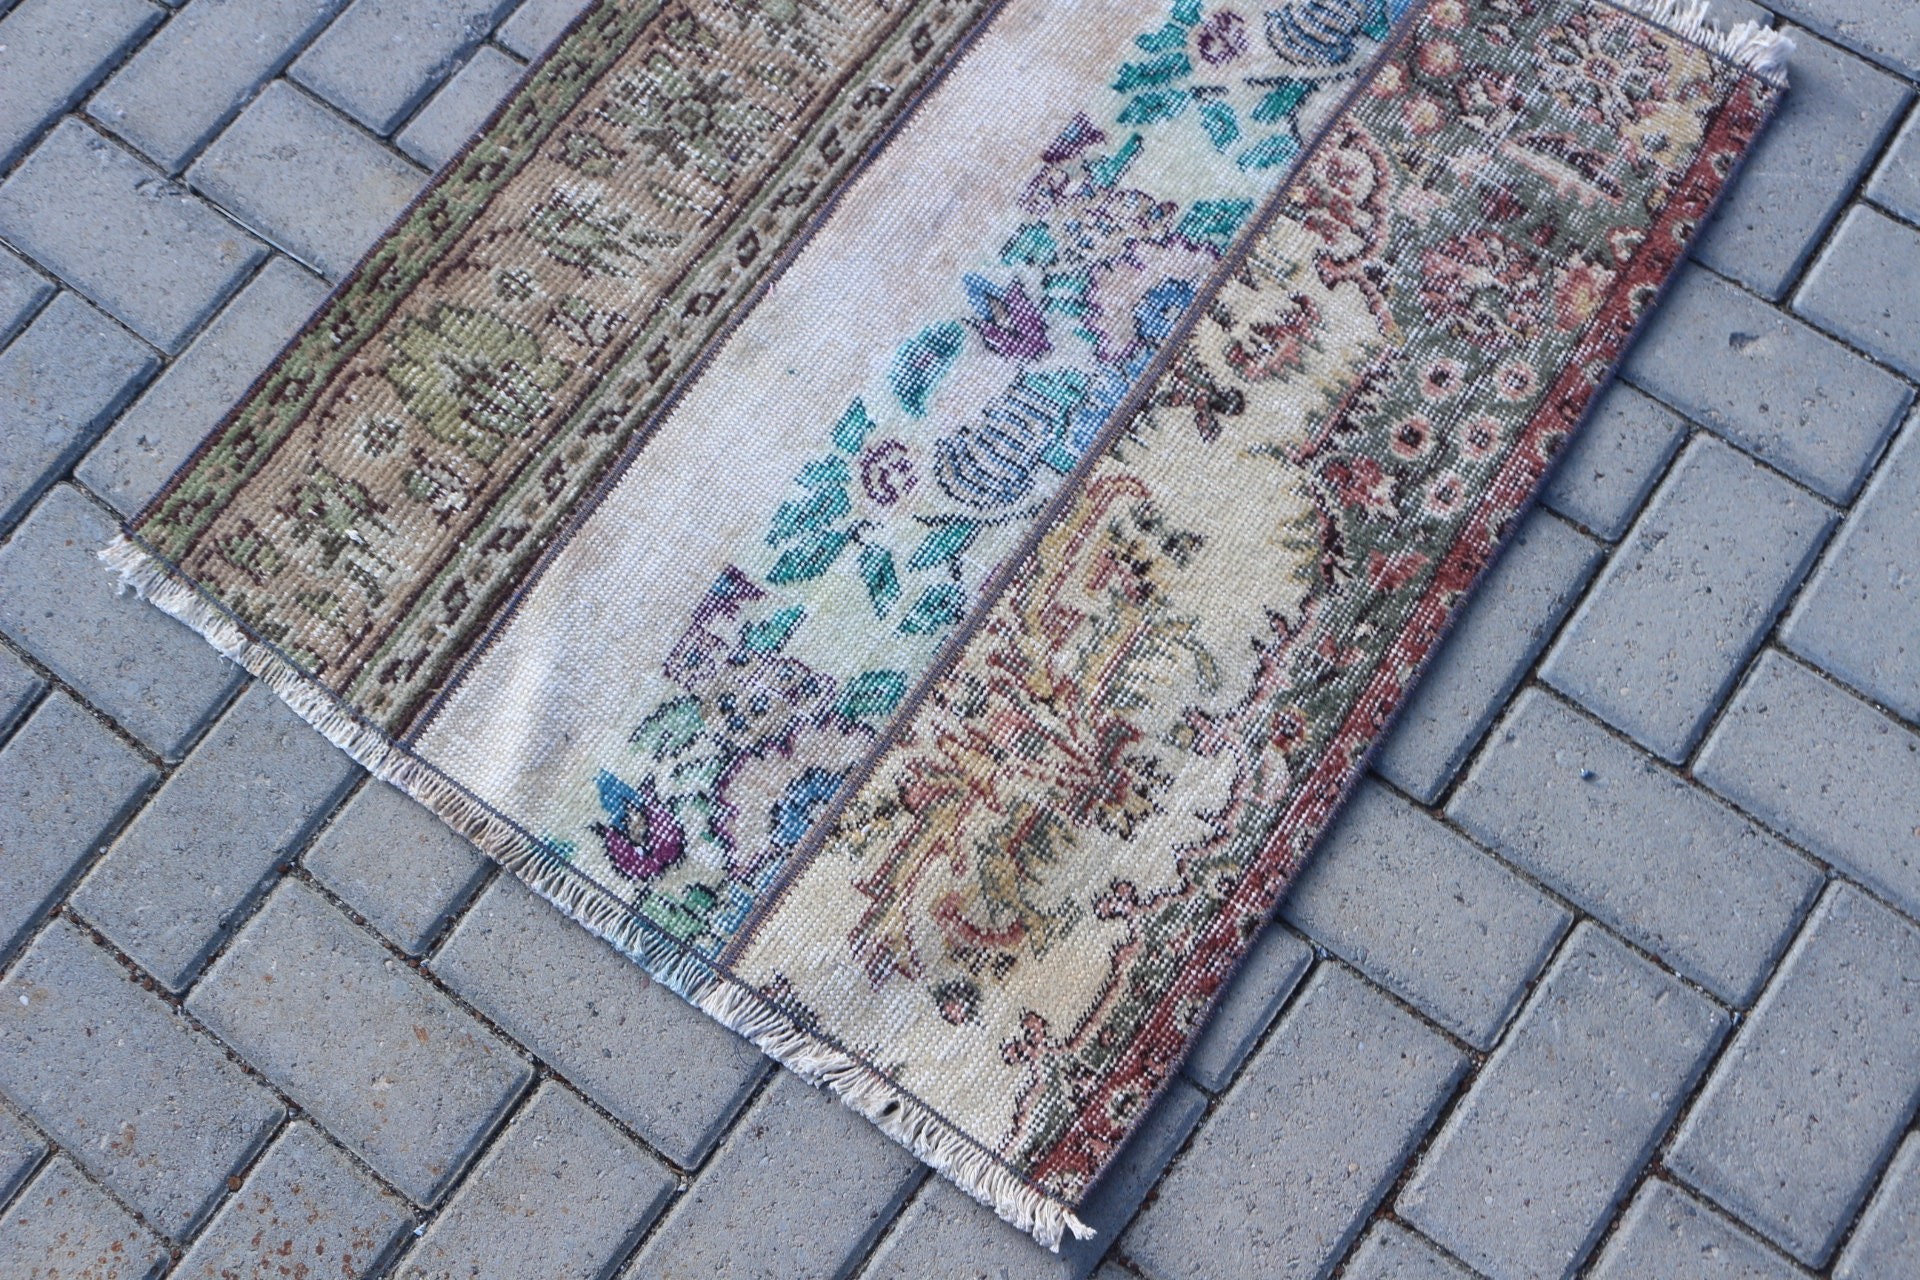 Car Mat Rug, Bath Rug, Vintage Rugs, Turkish Rugs, Moroccan Rugs, 2.3x2.8 ft Small Rug, Rugs for Kitchen, Beige Kitchen Rug, Kitchen Rugs